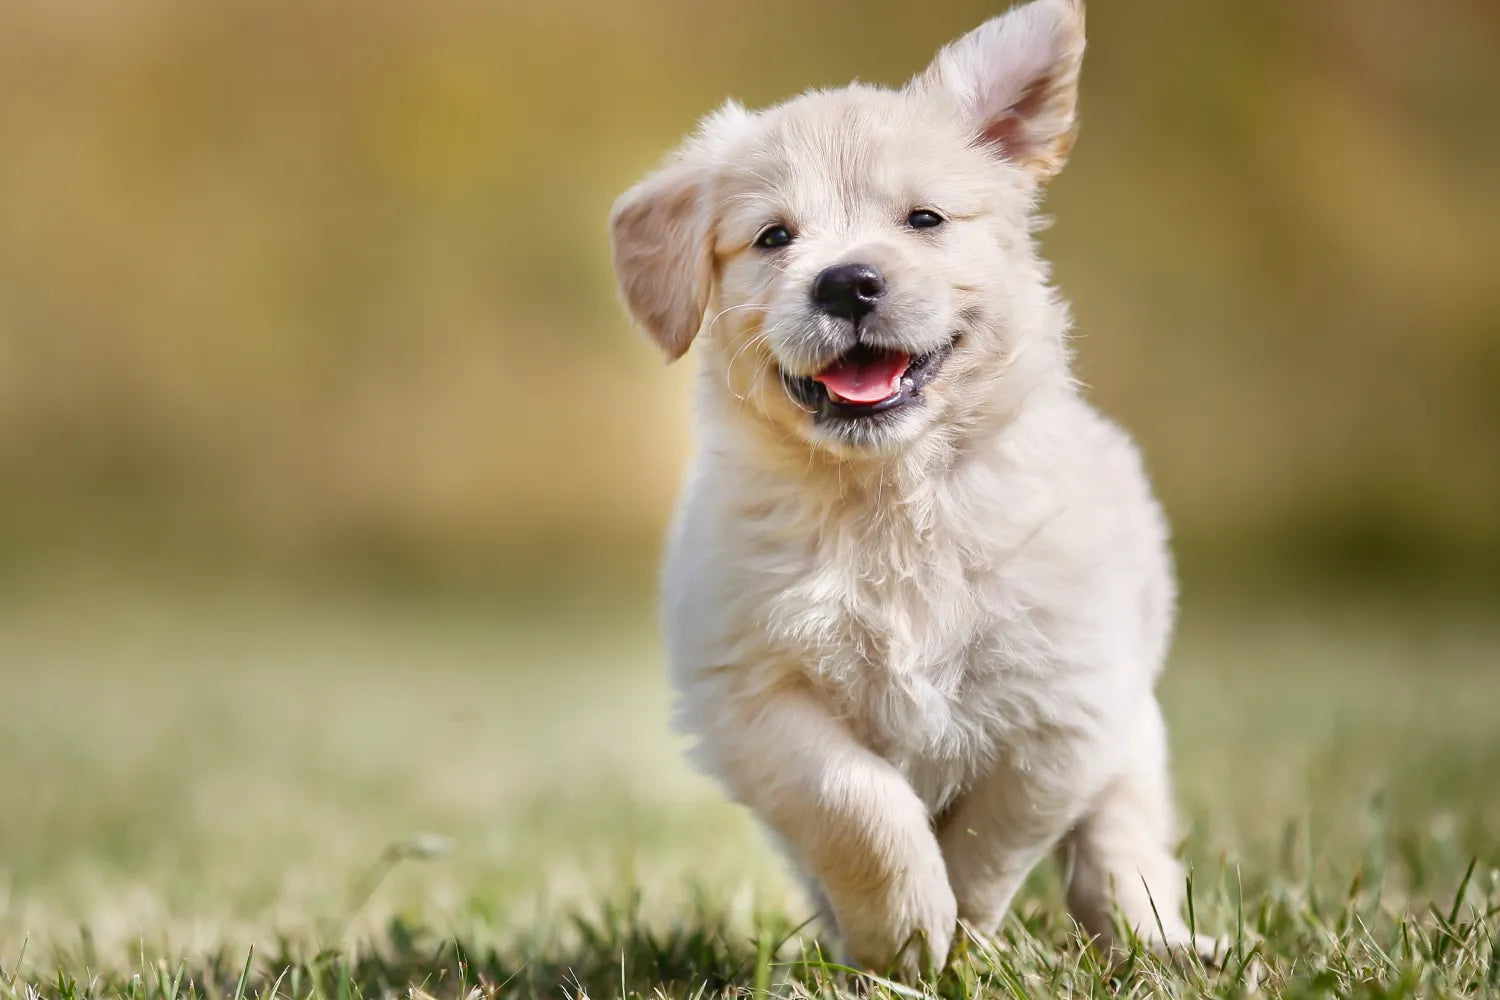 How To Raise a Puppy: 6 New Parent Tips 